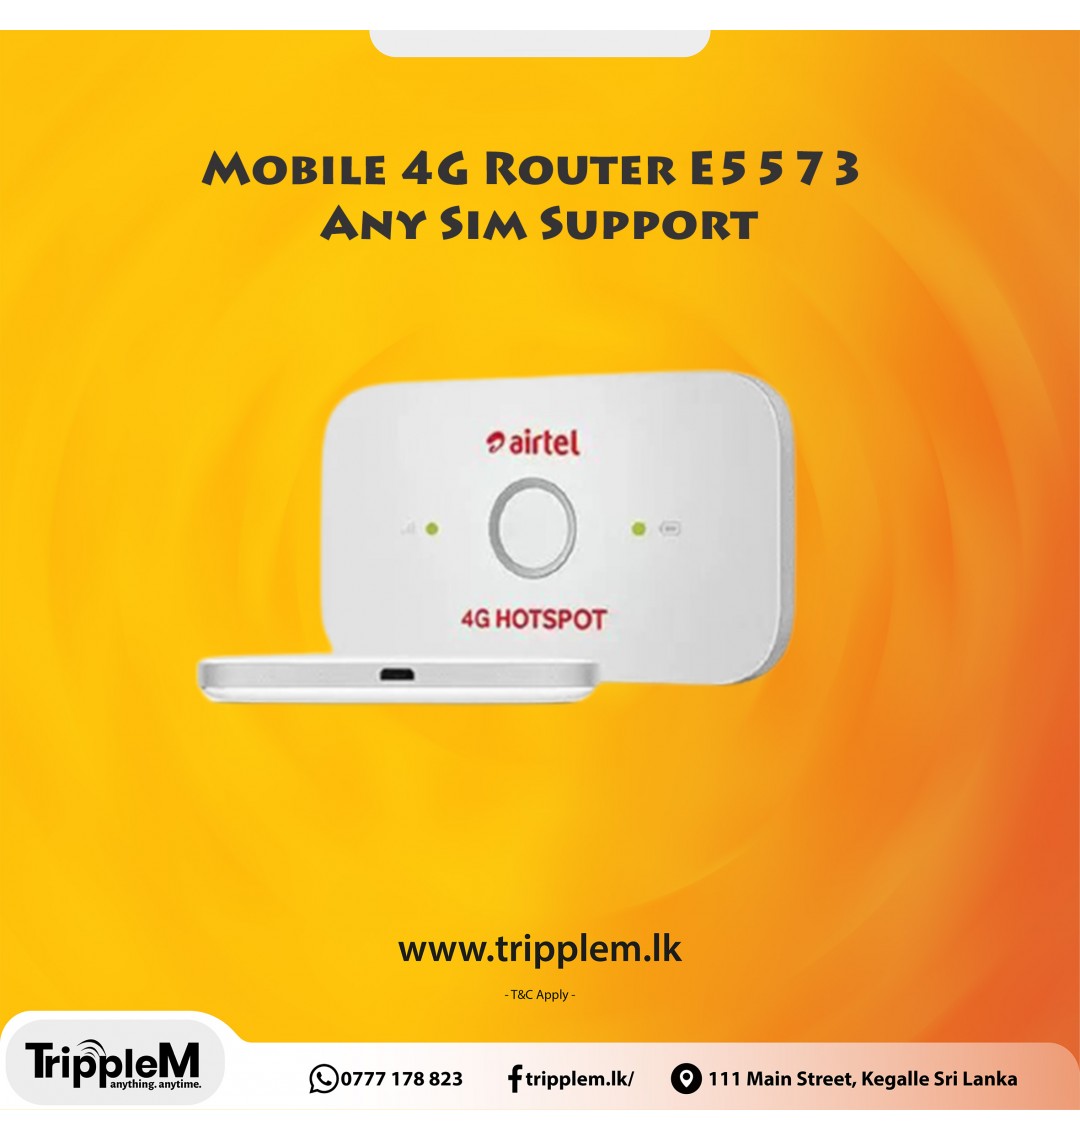 Mobile 4G Router E5573 Any Sim Support